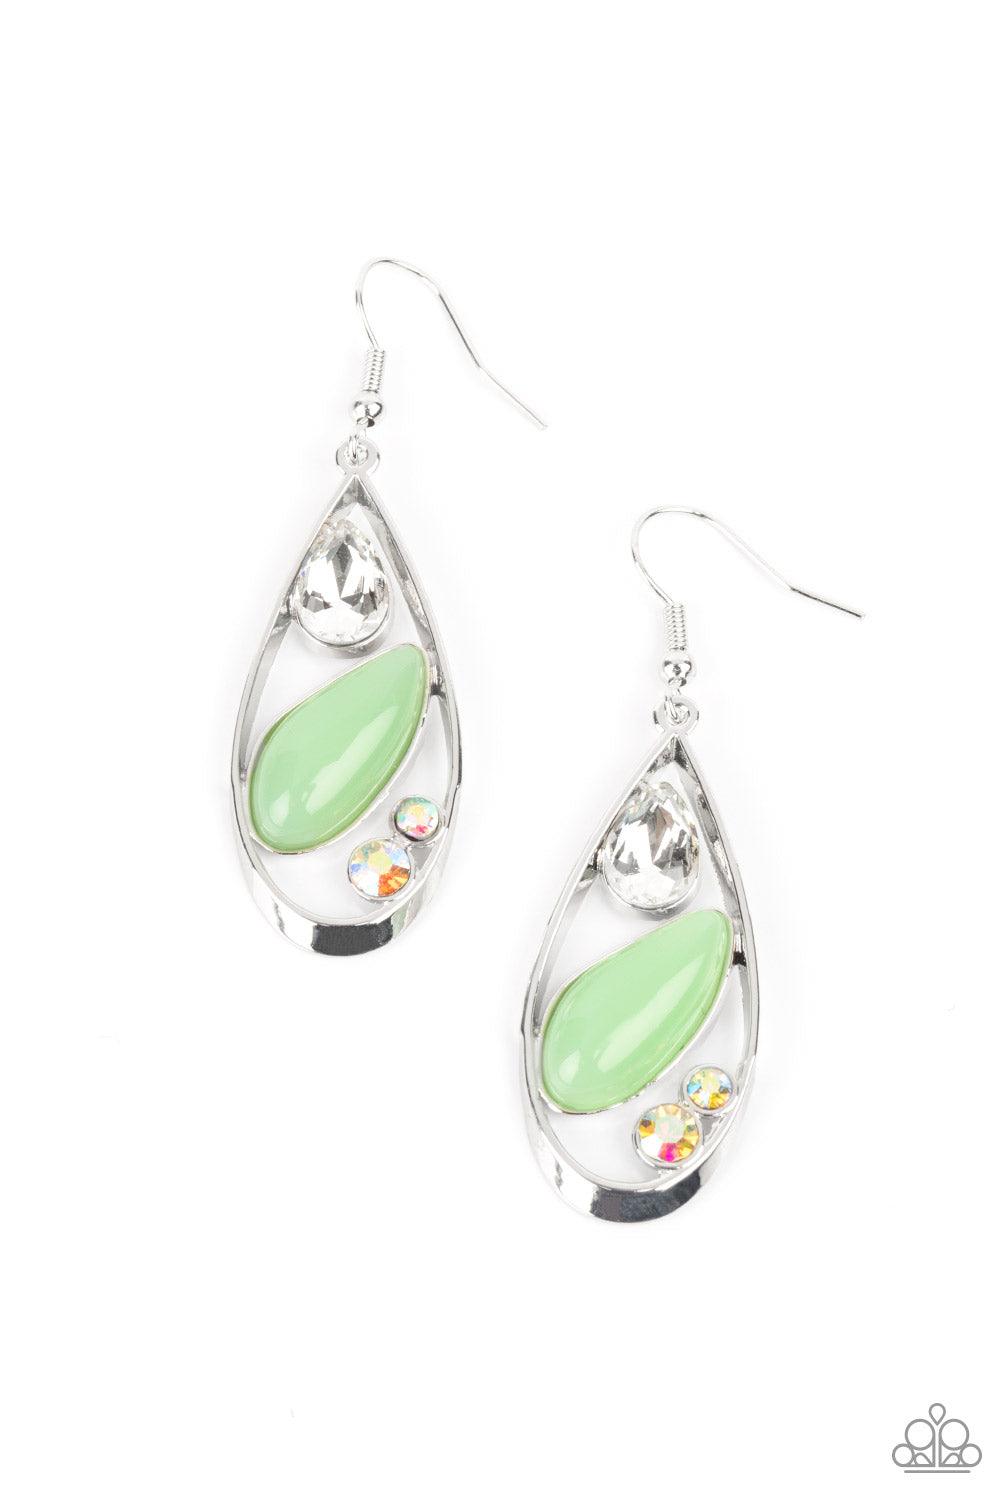 Paparazzi Accessories Harmonious Harbors - Green A silver teardrop frame embraces a collection of iridescent rhinestones and a milky Green Ash bead that is reminiscent of seashore finds. Earring attaches to a standard fishhook fitting. Sold as one pair of